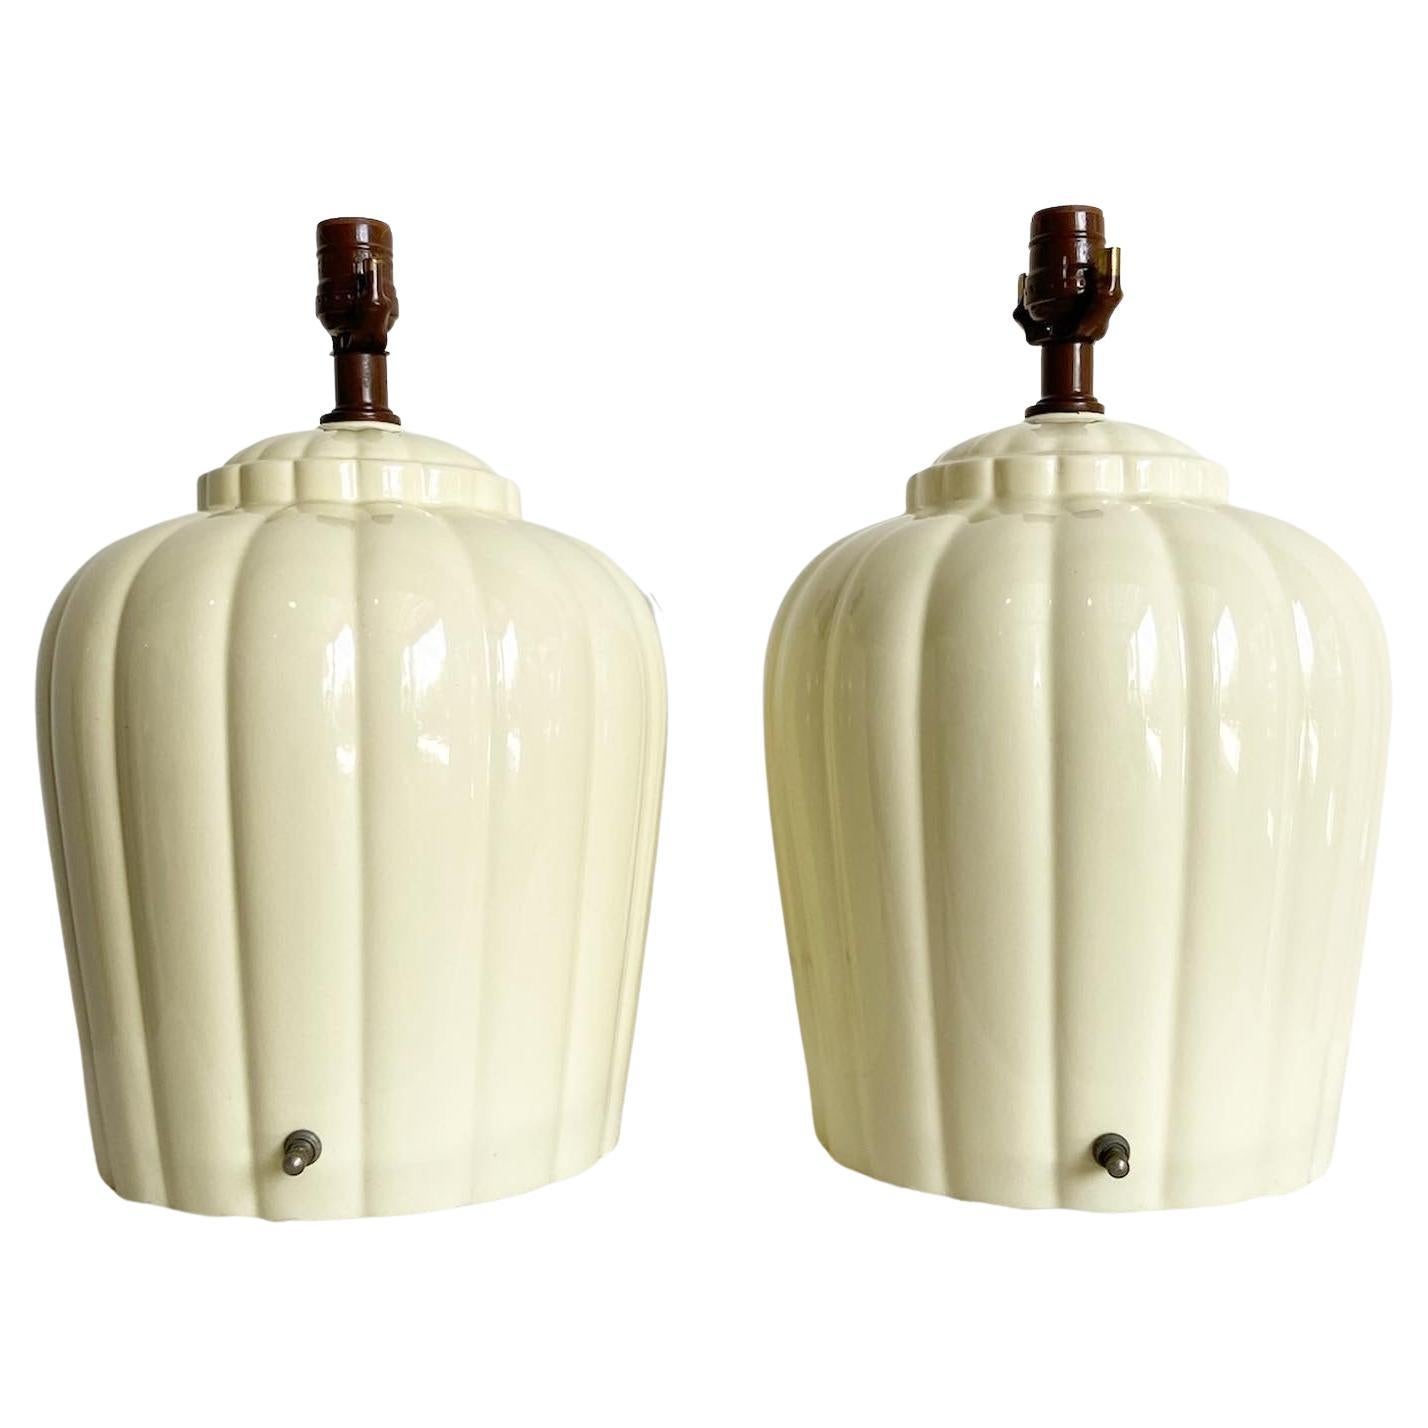 Postmodern Scalloped Cream Ceramic Table Lamps – a Pair